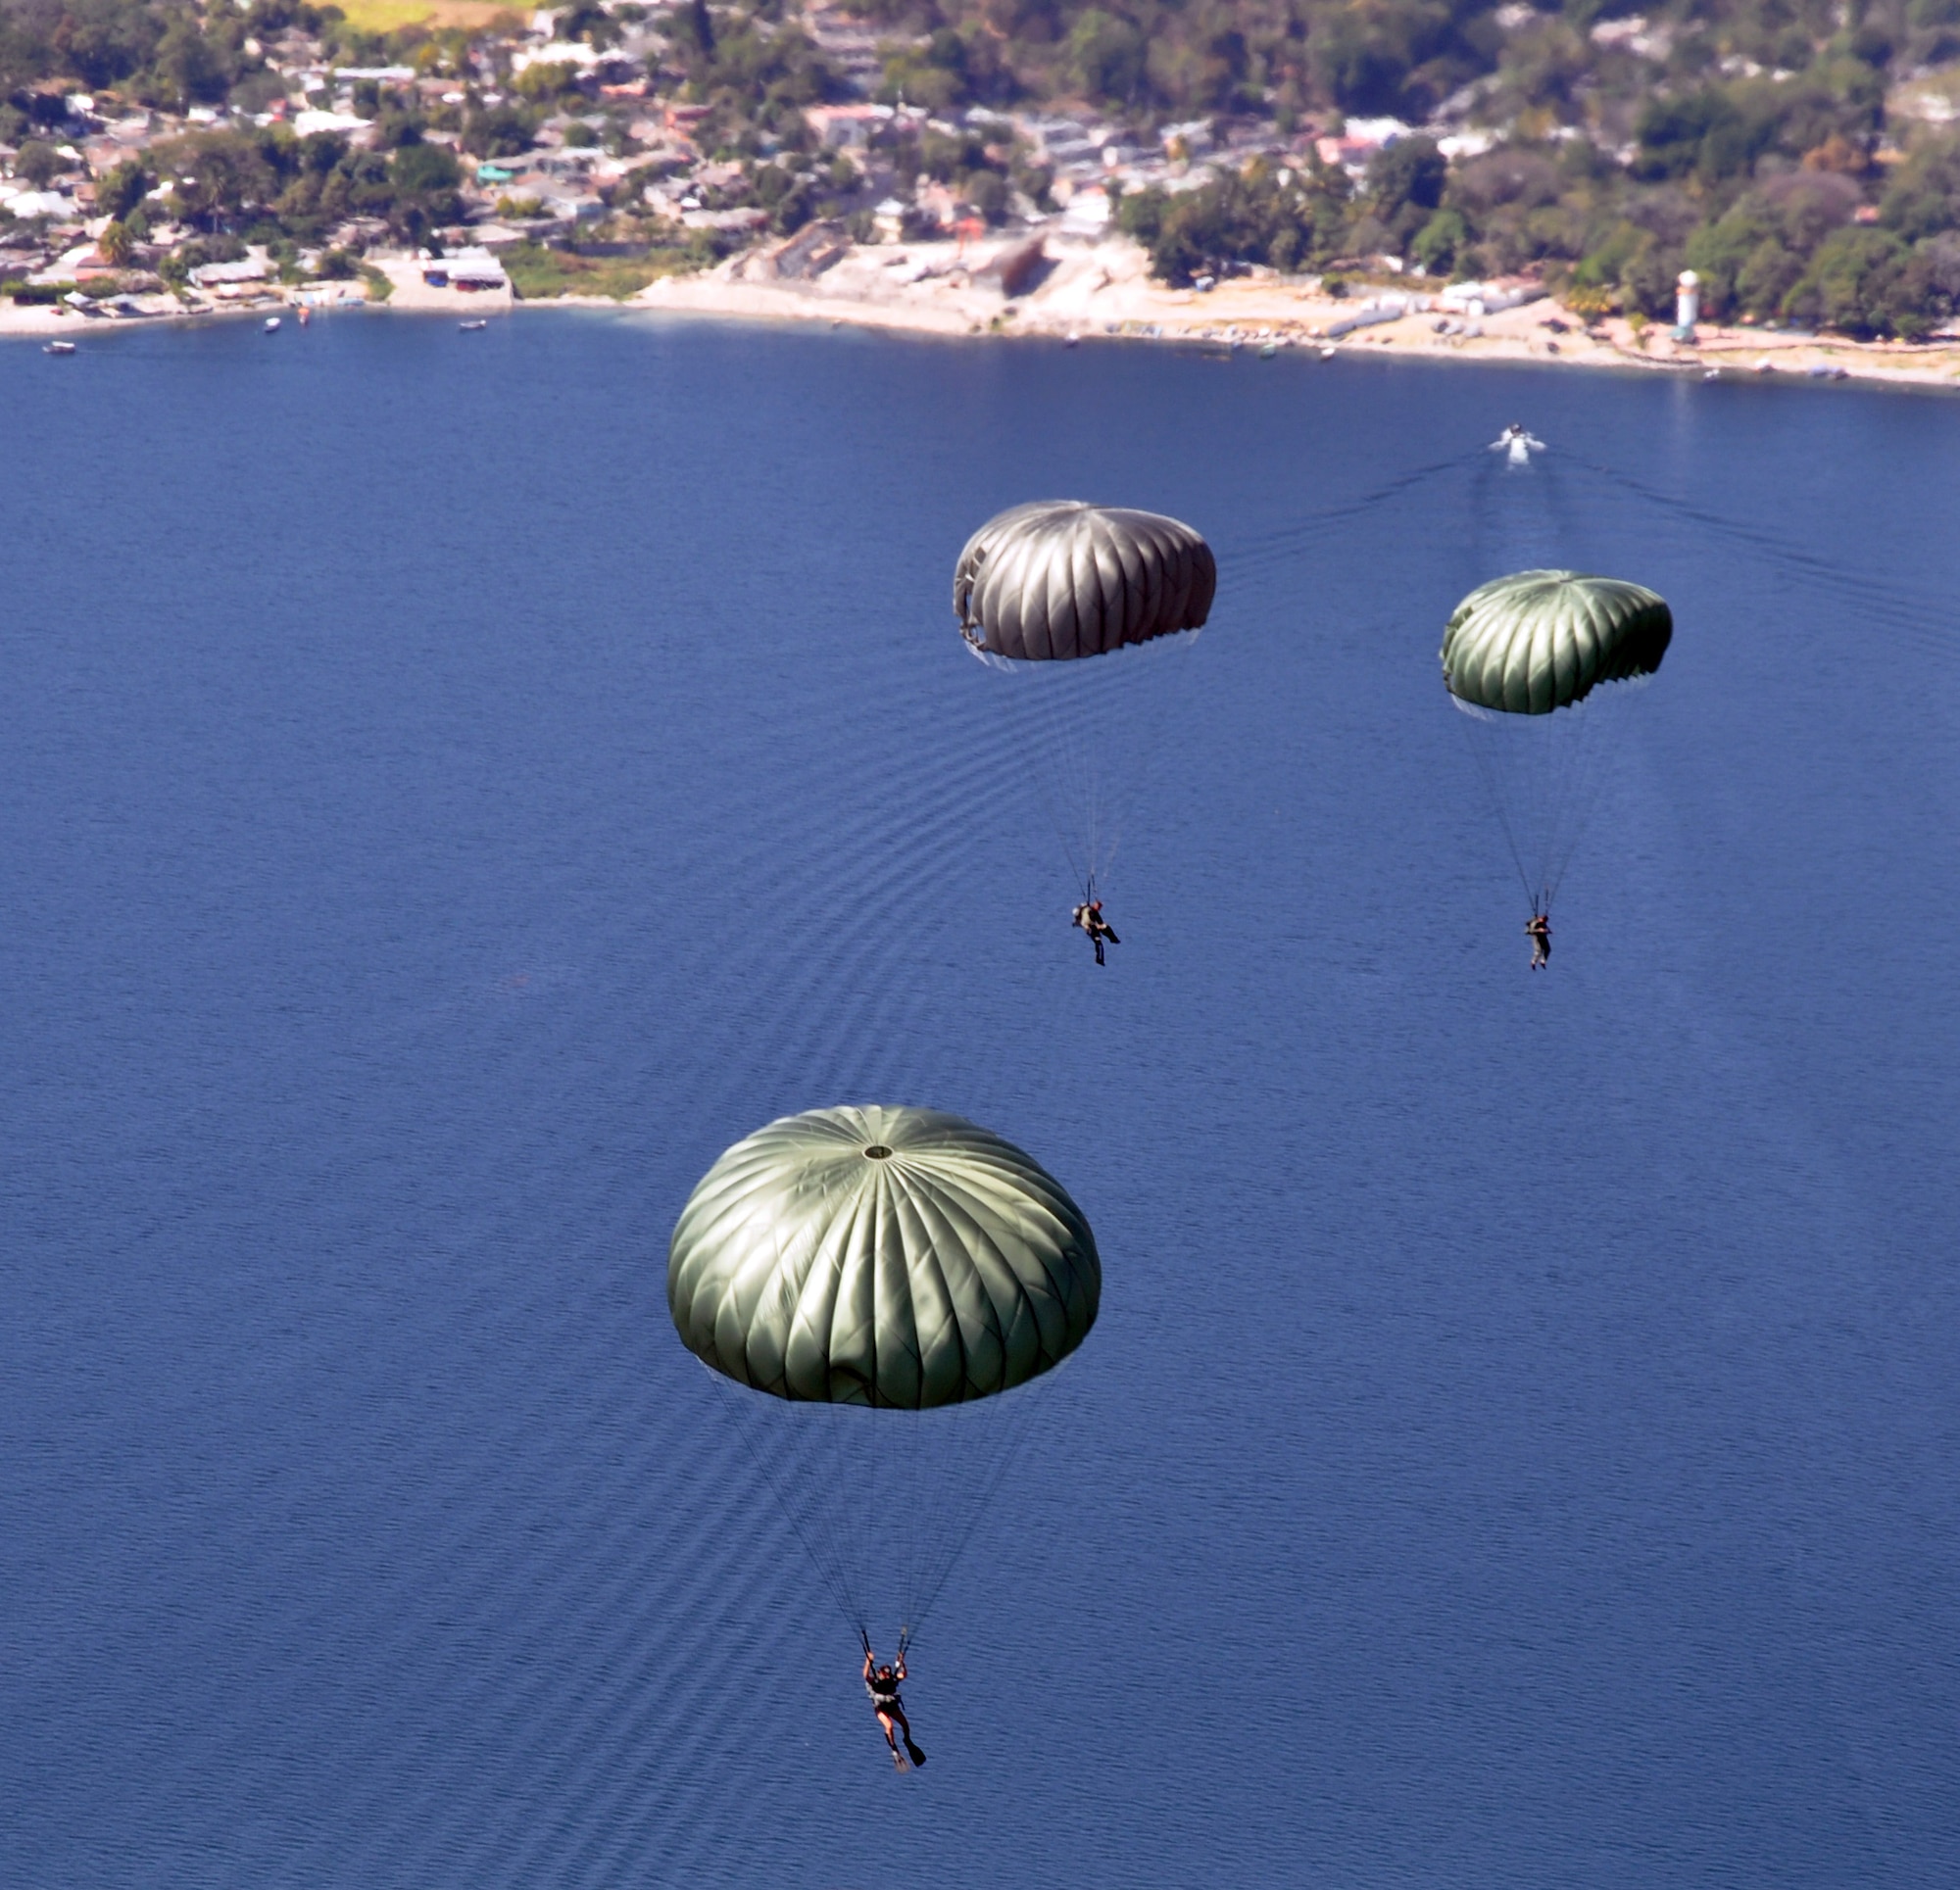 U.S. Special Forces and El Salvadoran military members maneuver under canopy after jumping from the ramp of a CH-47 Chinook helicopter at an altitude of 1,250 feet during a joint airborne operations training exercise conducted by U.S. Special Forces and El Salvadoran servicemembers over Lake Ilopango, El Salvador, Jan. 21, 2014.  U.S. Special Forces from the 7th Special Forces Group (Airborne) conducted the training exercise alongside members of the El Salvadoran military.  The joint-training, overwater static jump allowed members from both nations to maintain currency while strengthening the relationship between the U.S. and El Salvadoran forces.  Joint Task Force-Bravo’s 1-228th Aviation Regiment provided aerial support for the exercise, flying each chalk of jumpers from the Ilopango International Airport to the drop zone over Lake Ilopango.  (U.S. Air Force photo by Capt. Zach Anderson)